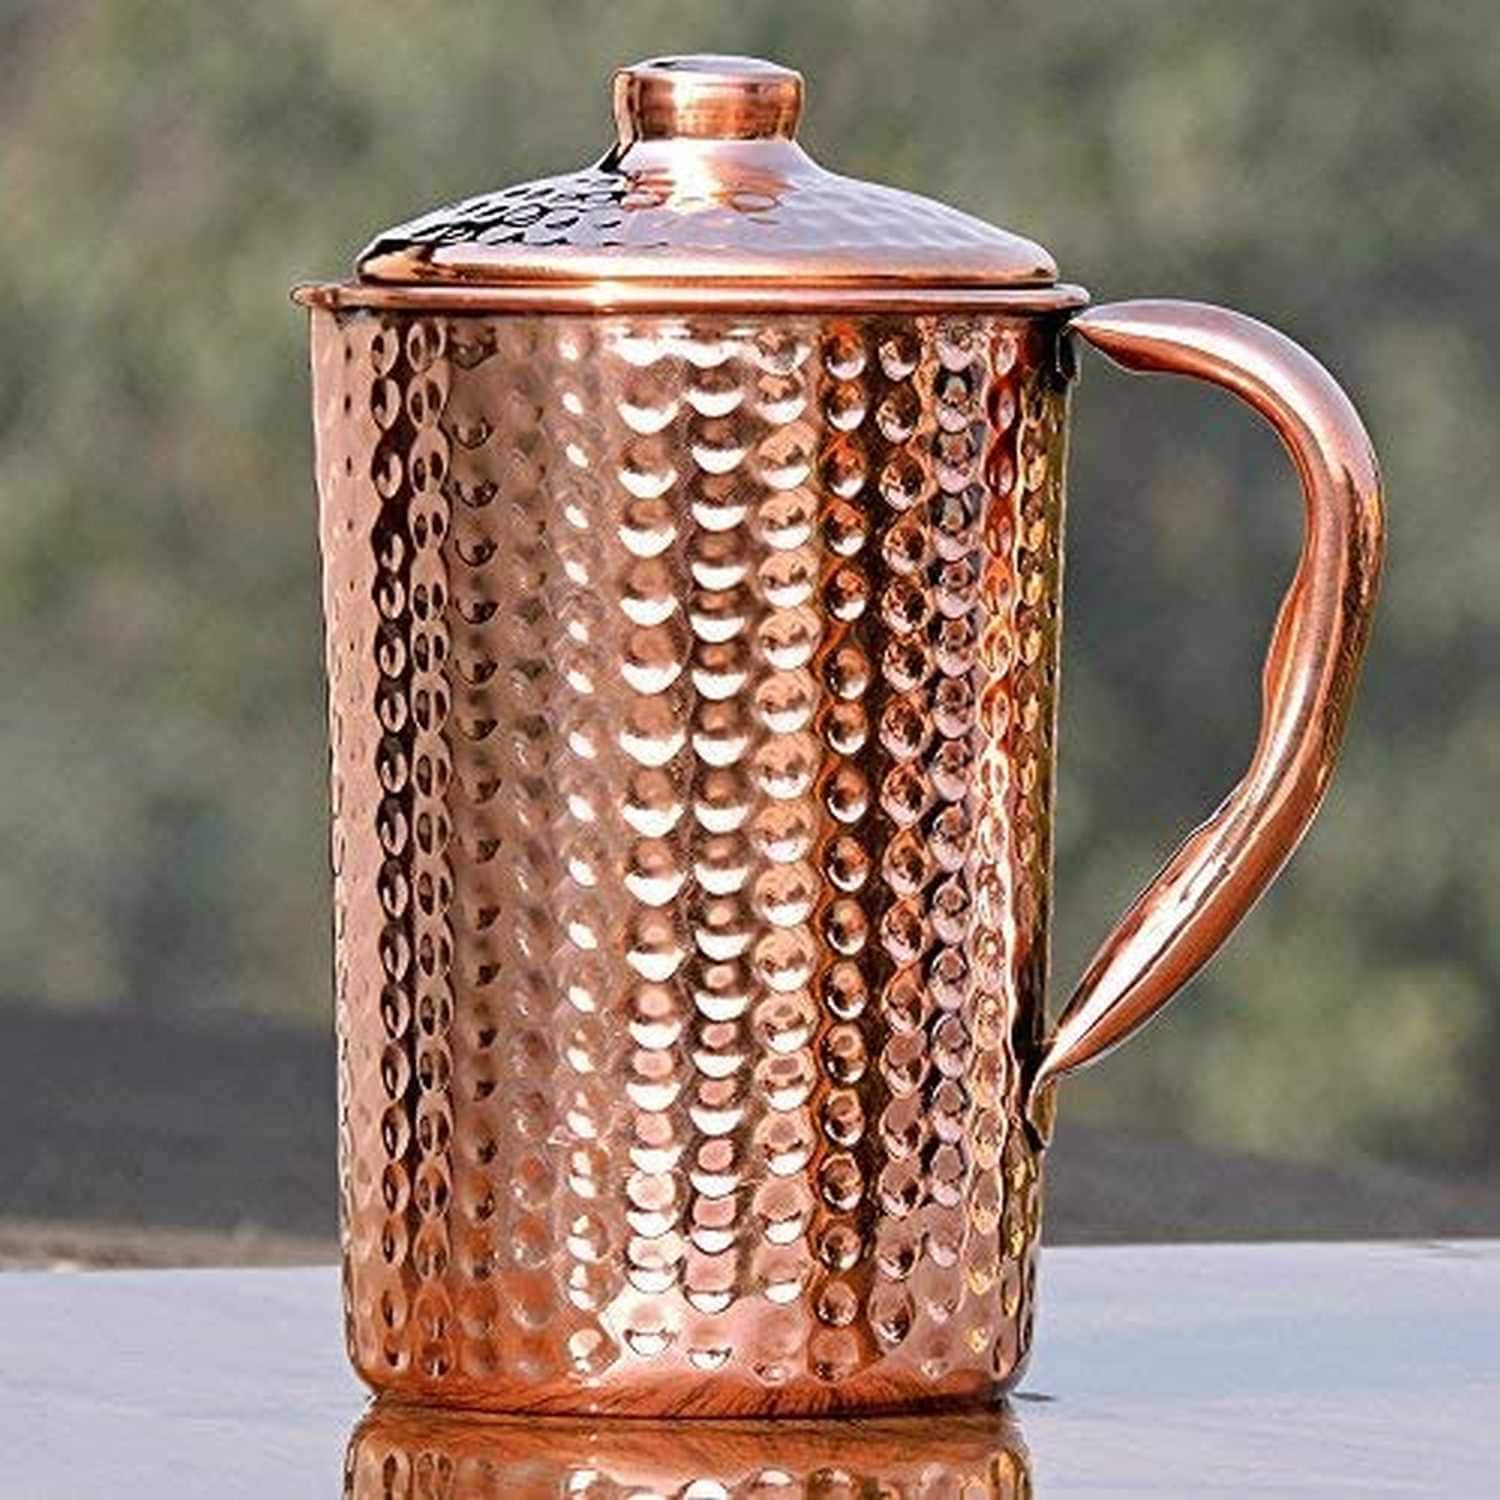 100% Pure 1 Copper Water Jug Pitcher New Copper Indian Ayurveda Product01 